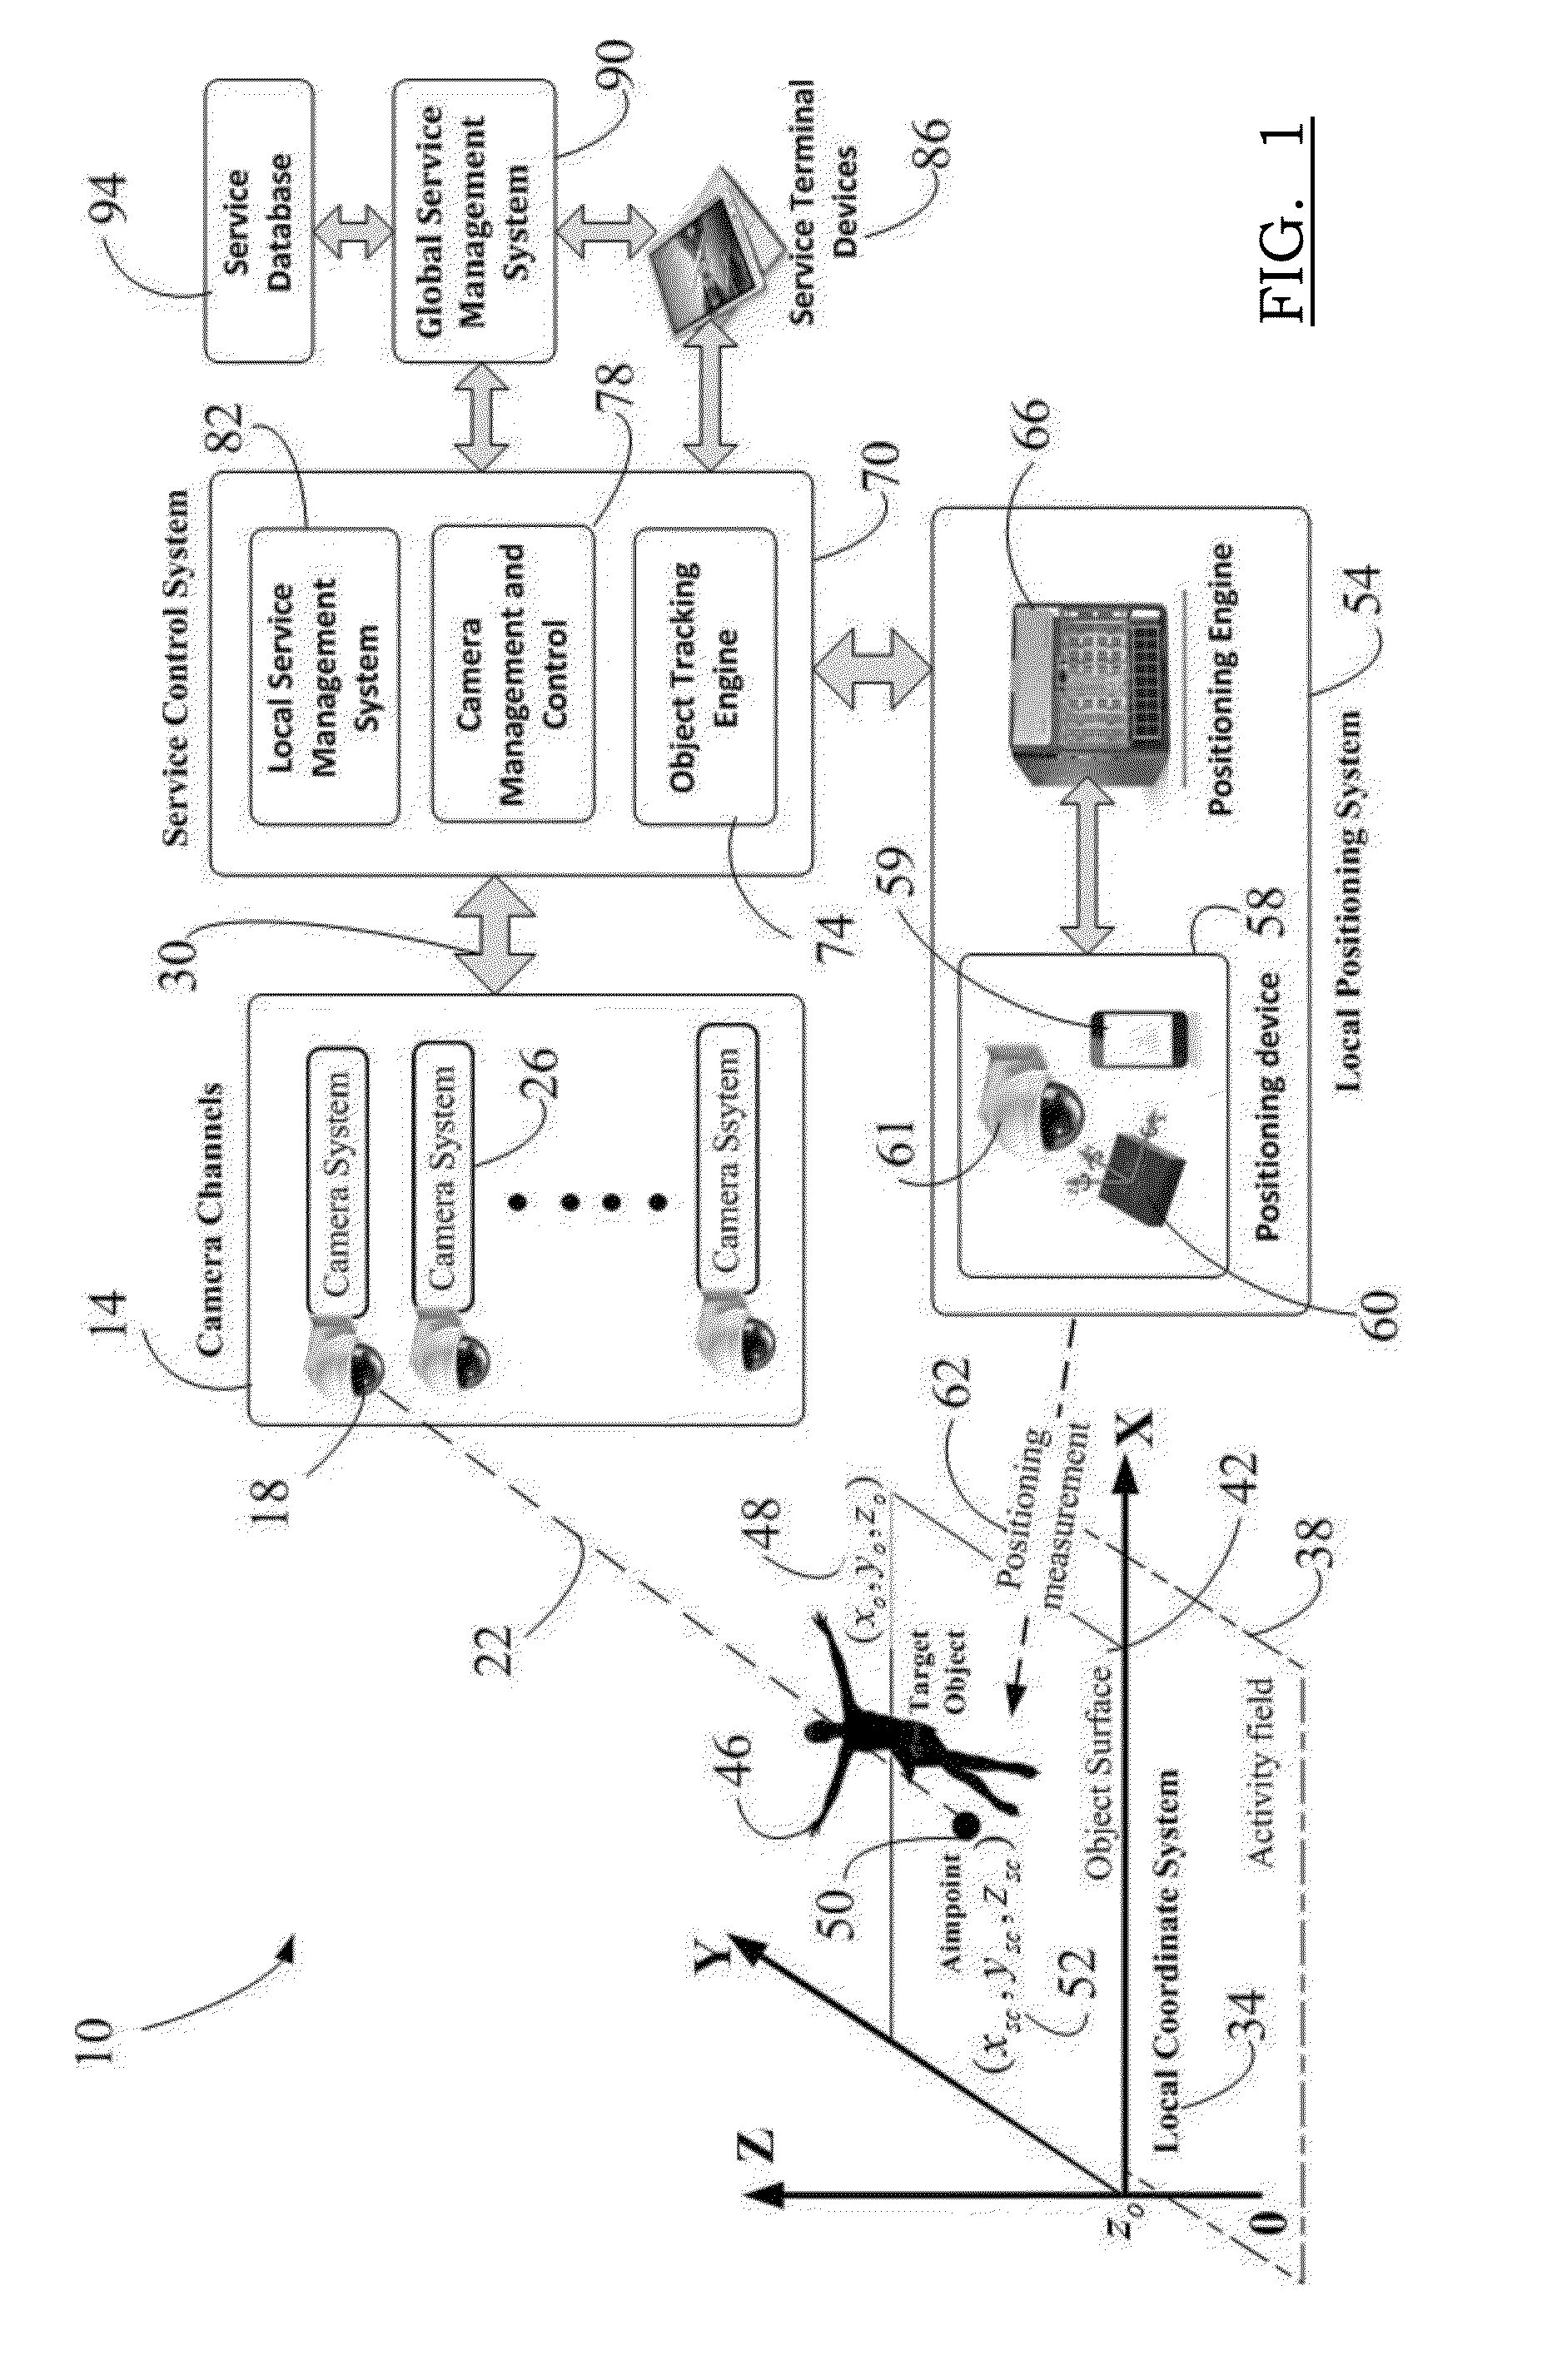 Local positioning and motion estimation based camera viewing system and methods